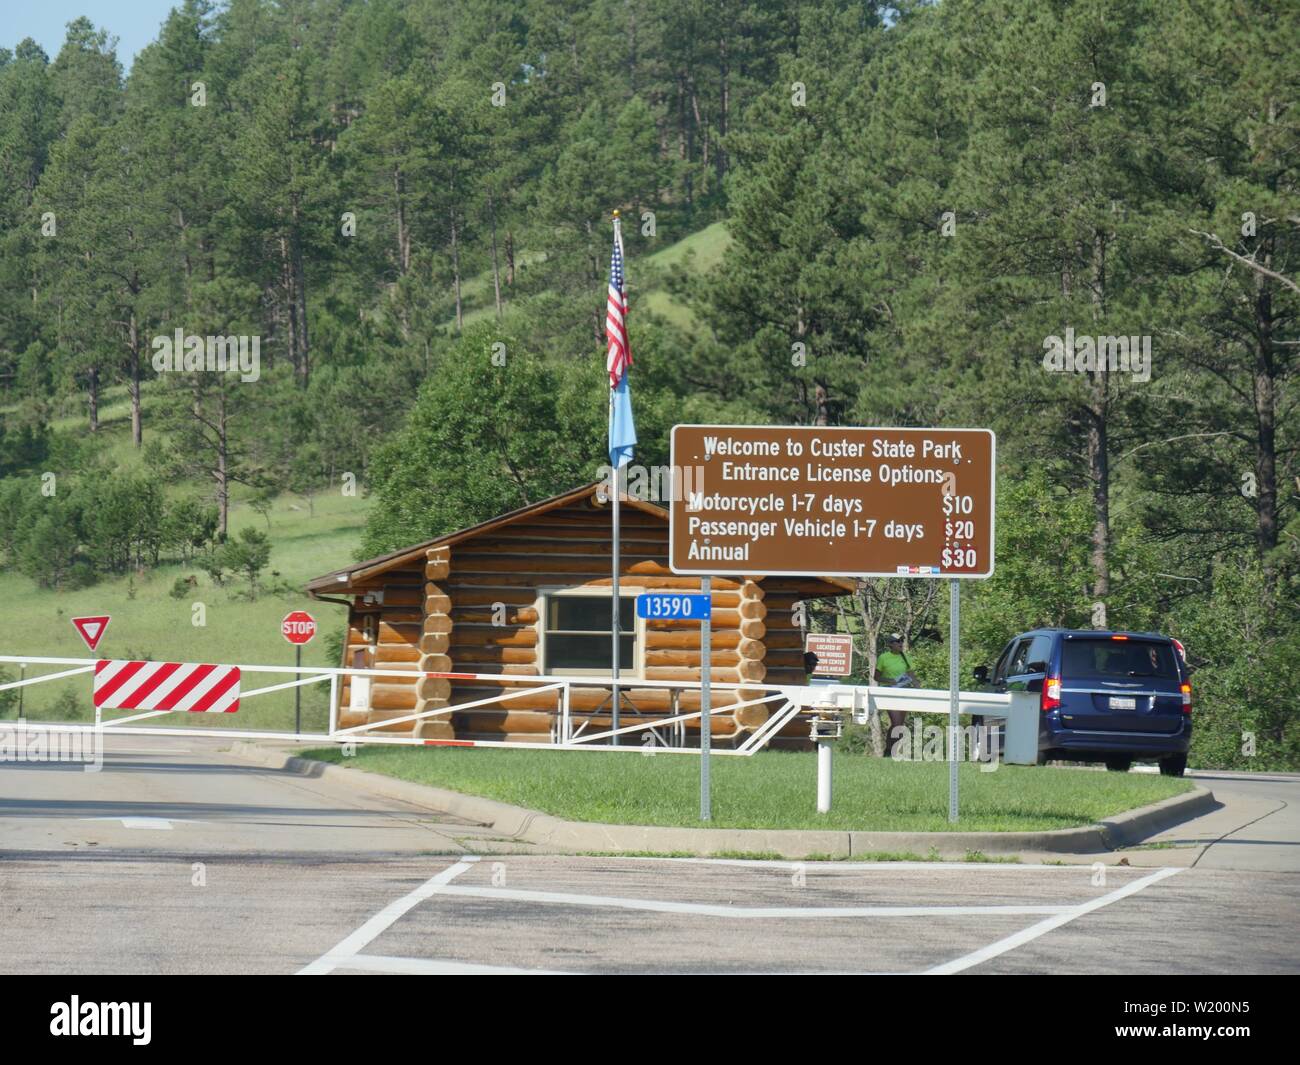 custer-county-south-dakota-july-2018-billboard-with-the-corresponding-admission-fees-at-custer-state-park-in-south-dakota-W200N5.jpg